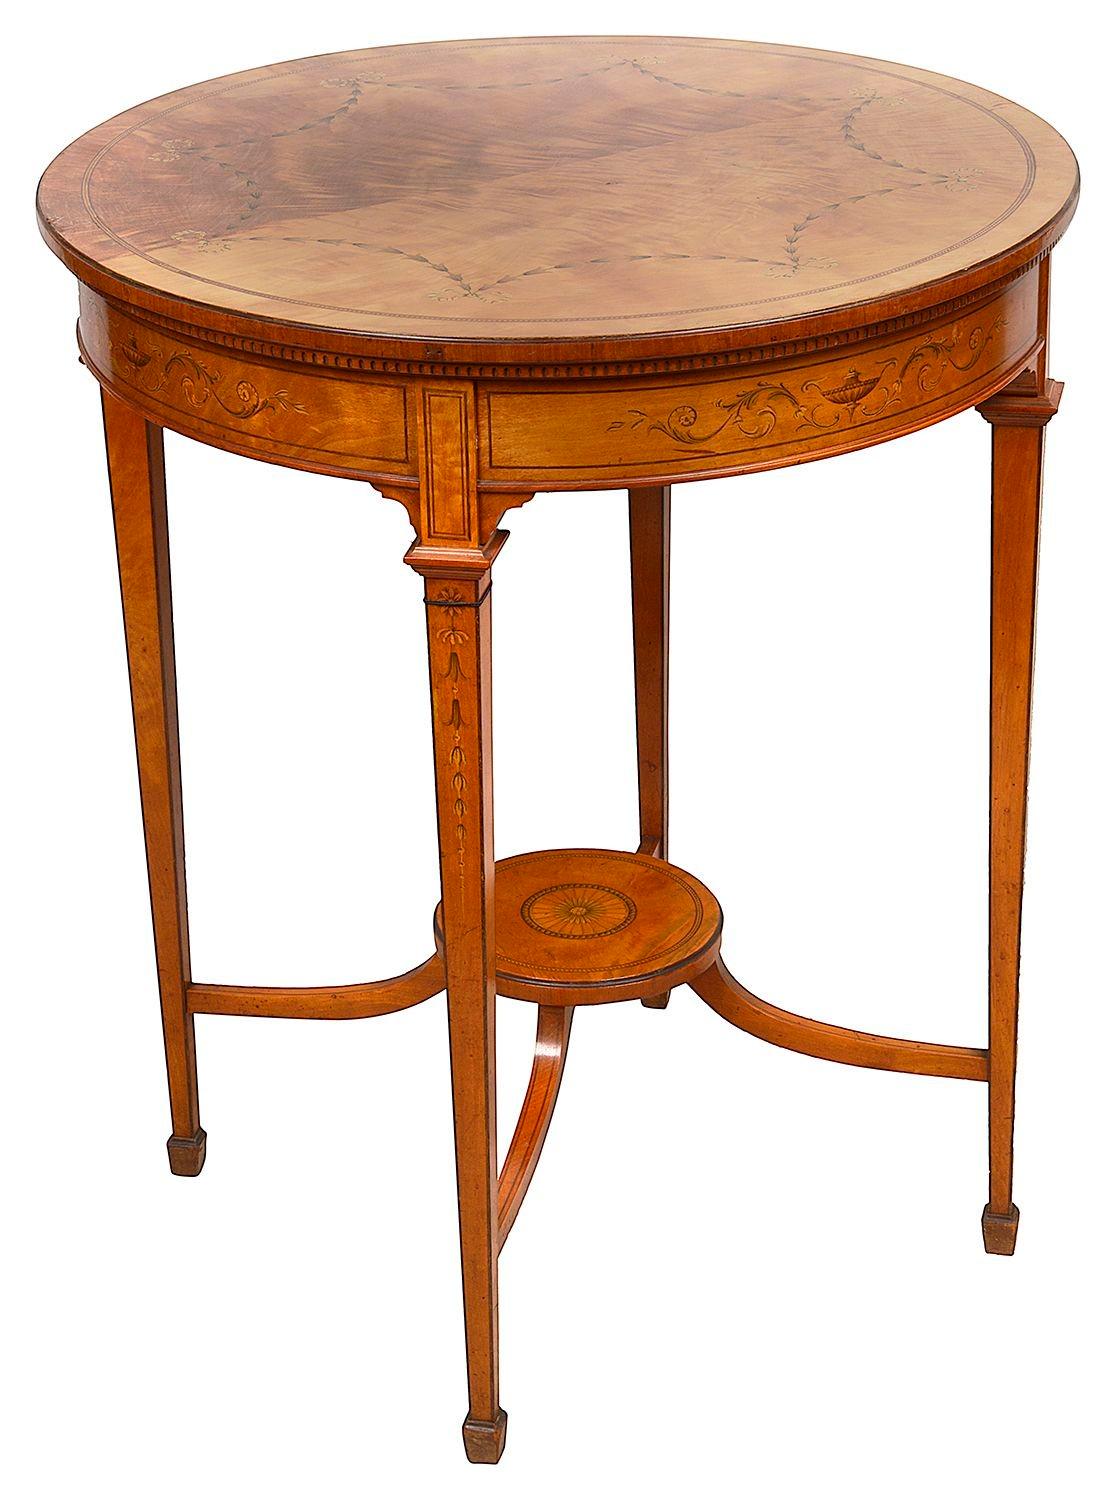 Sheraton Revival Satinwood Inlaid Side Table, 19th Century In Good Condition For Sale In Brighton, Sussex